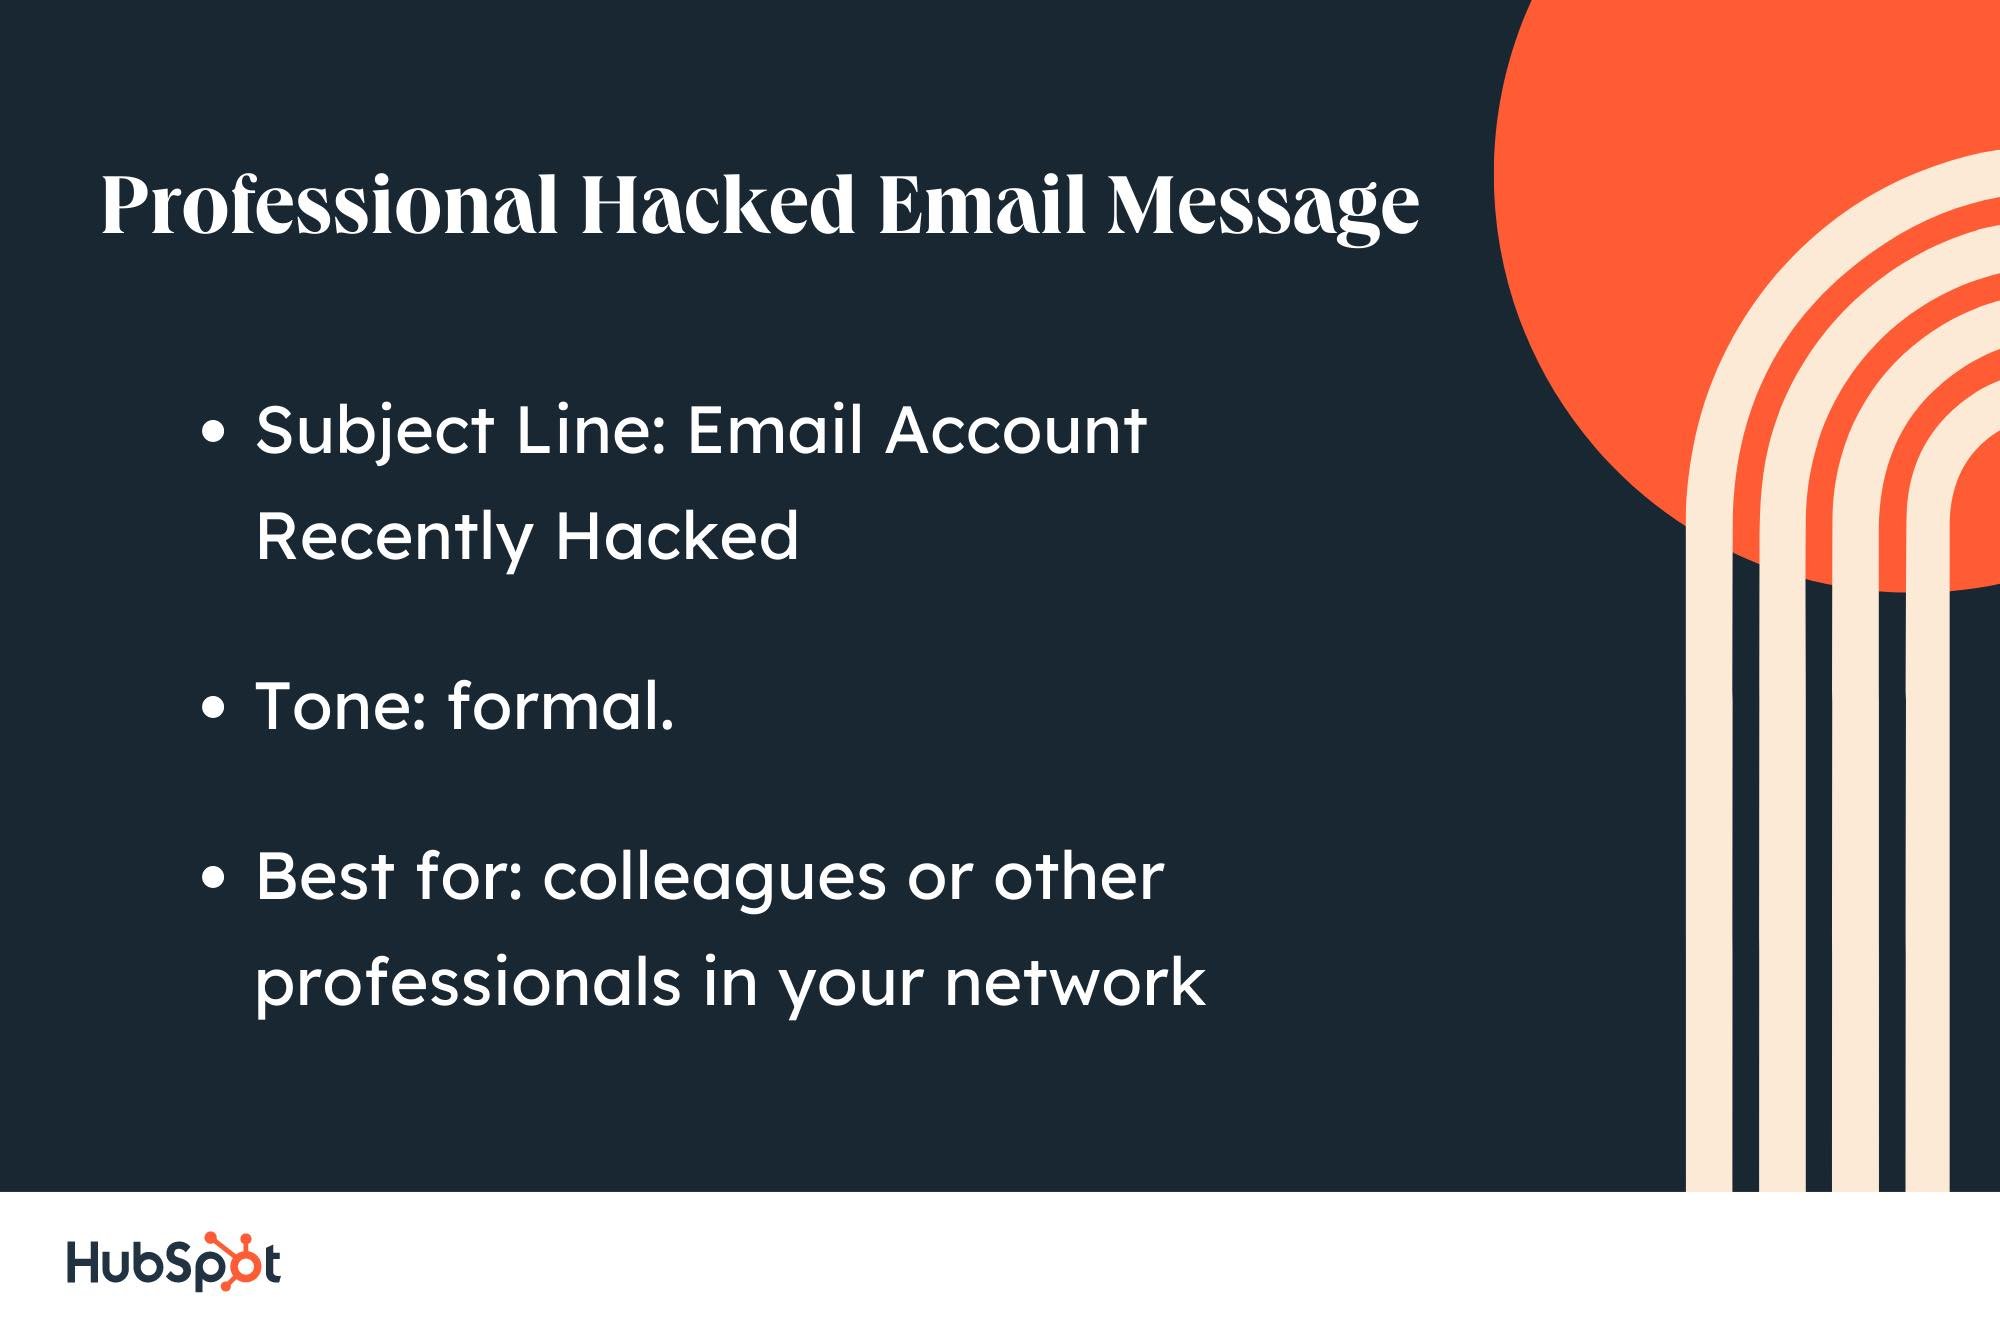 sample letter for hacked email: subject line, recently hacked email account;  formal tone;  best for colleagues.